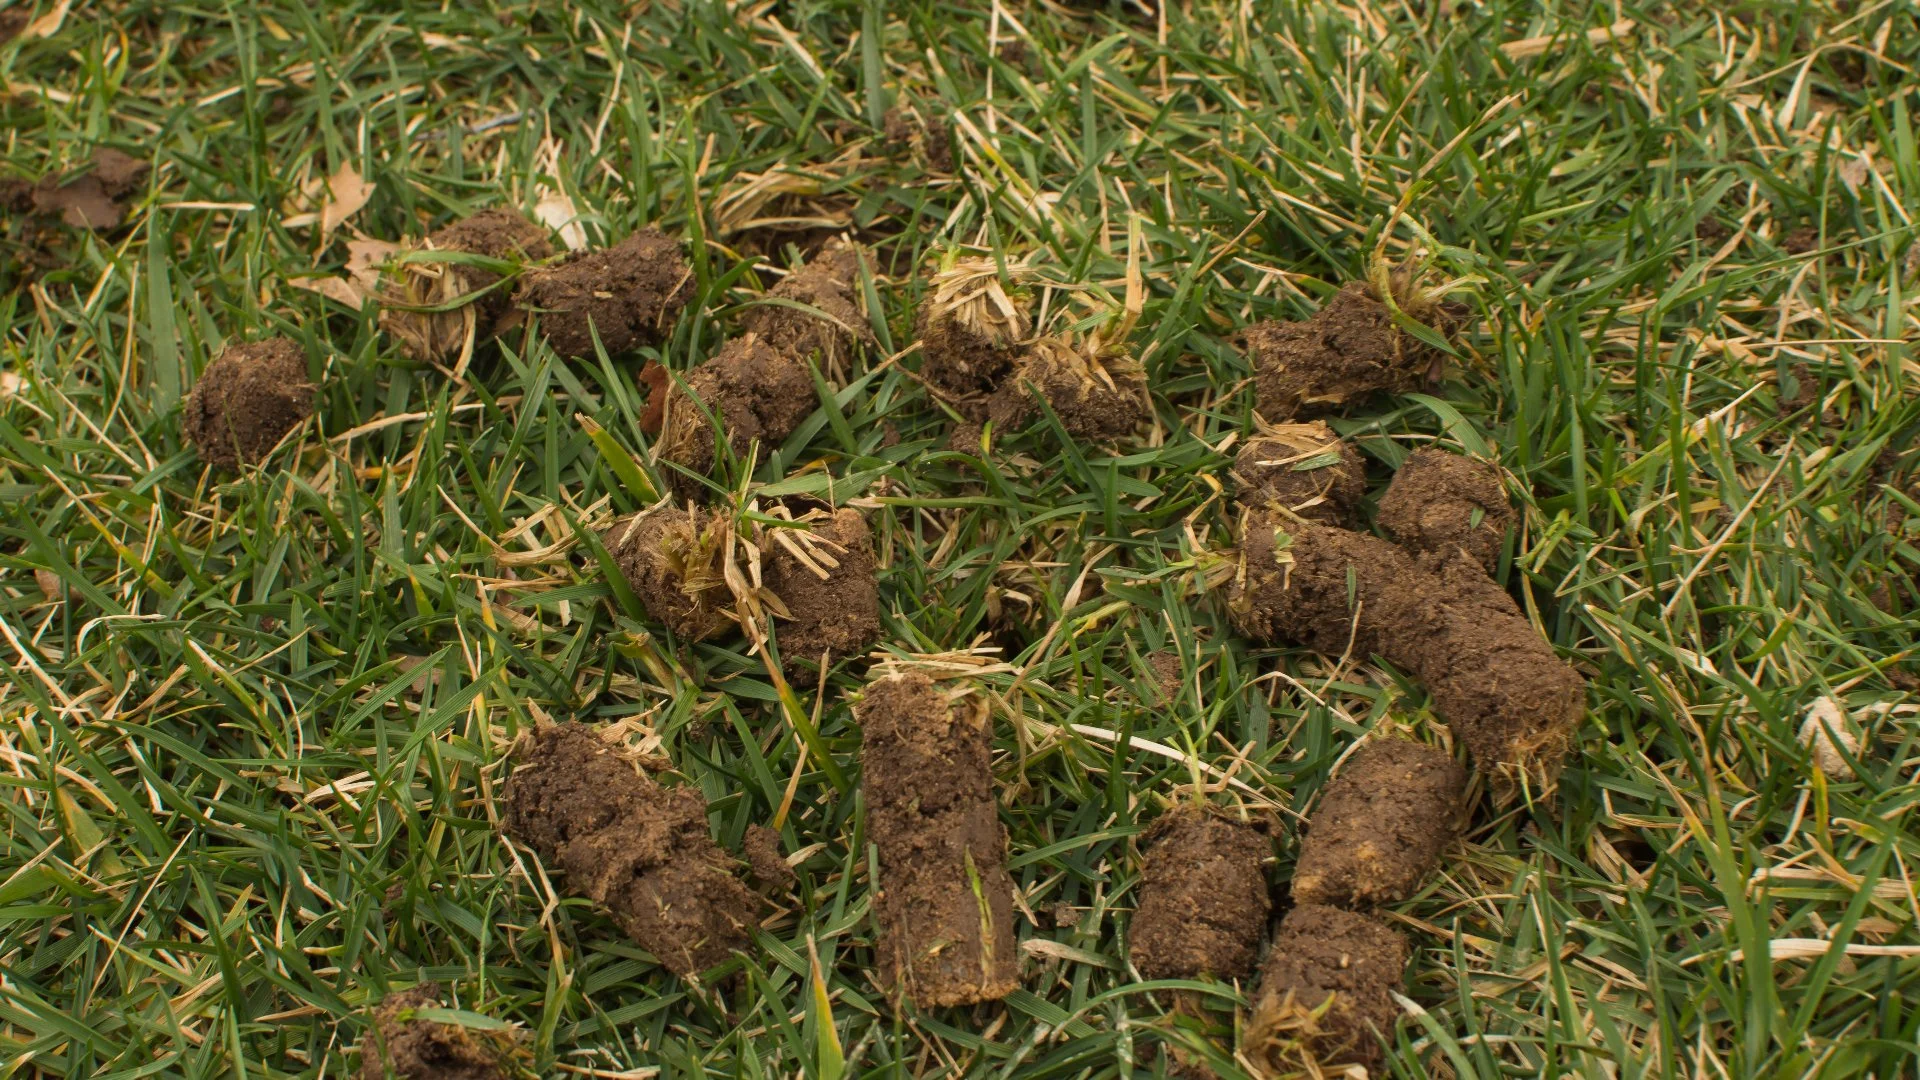 Noticing Clumps of Soil All Over Your Lawn After Aeration? Read This!